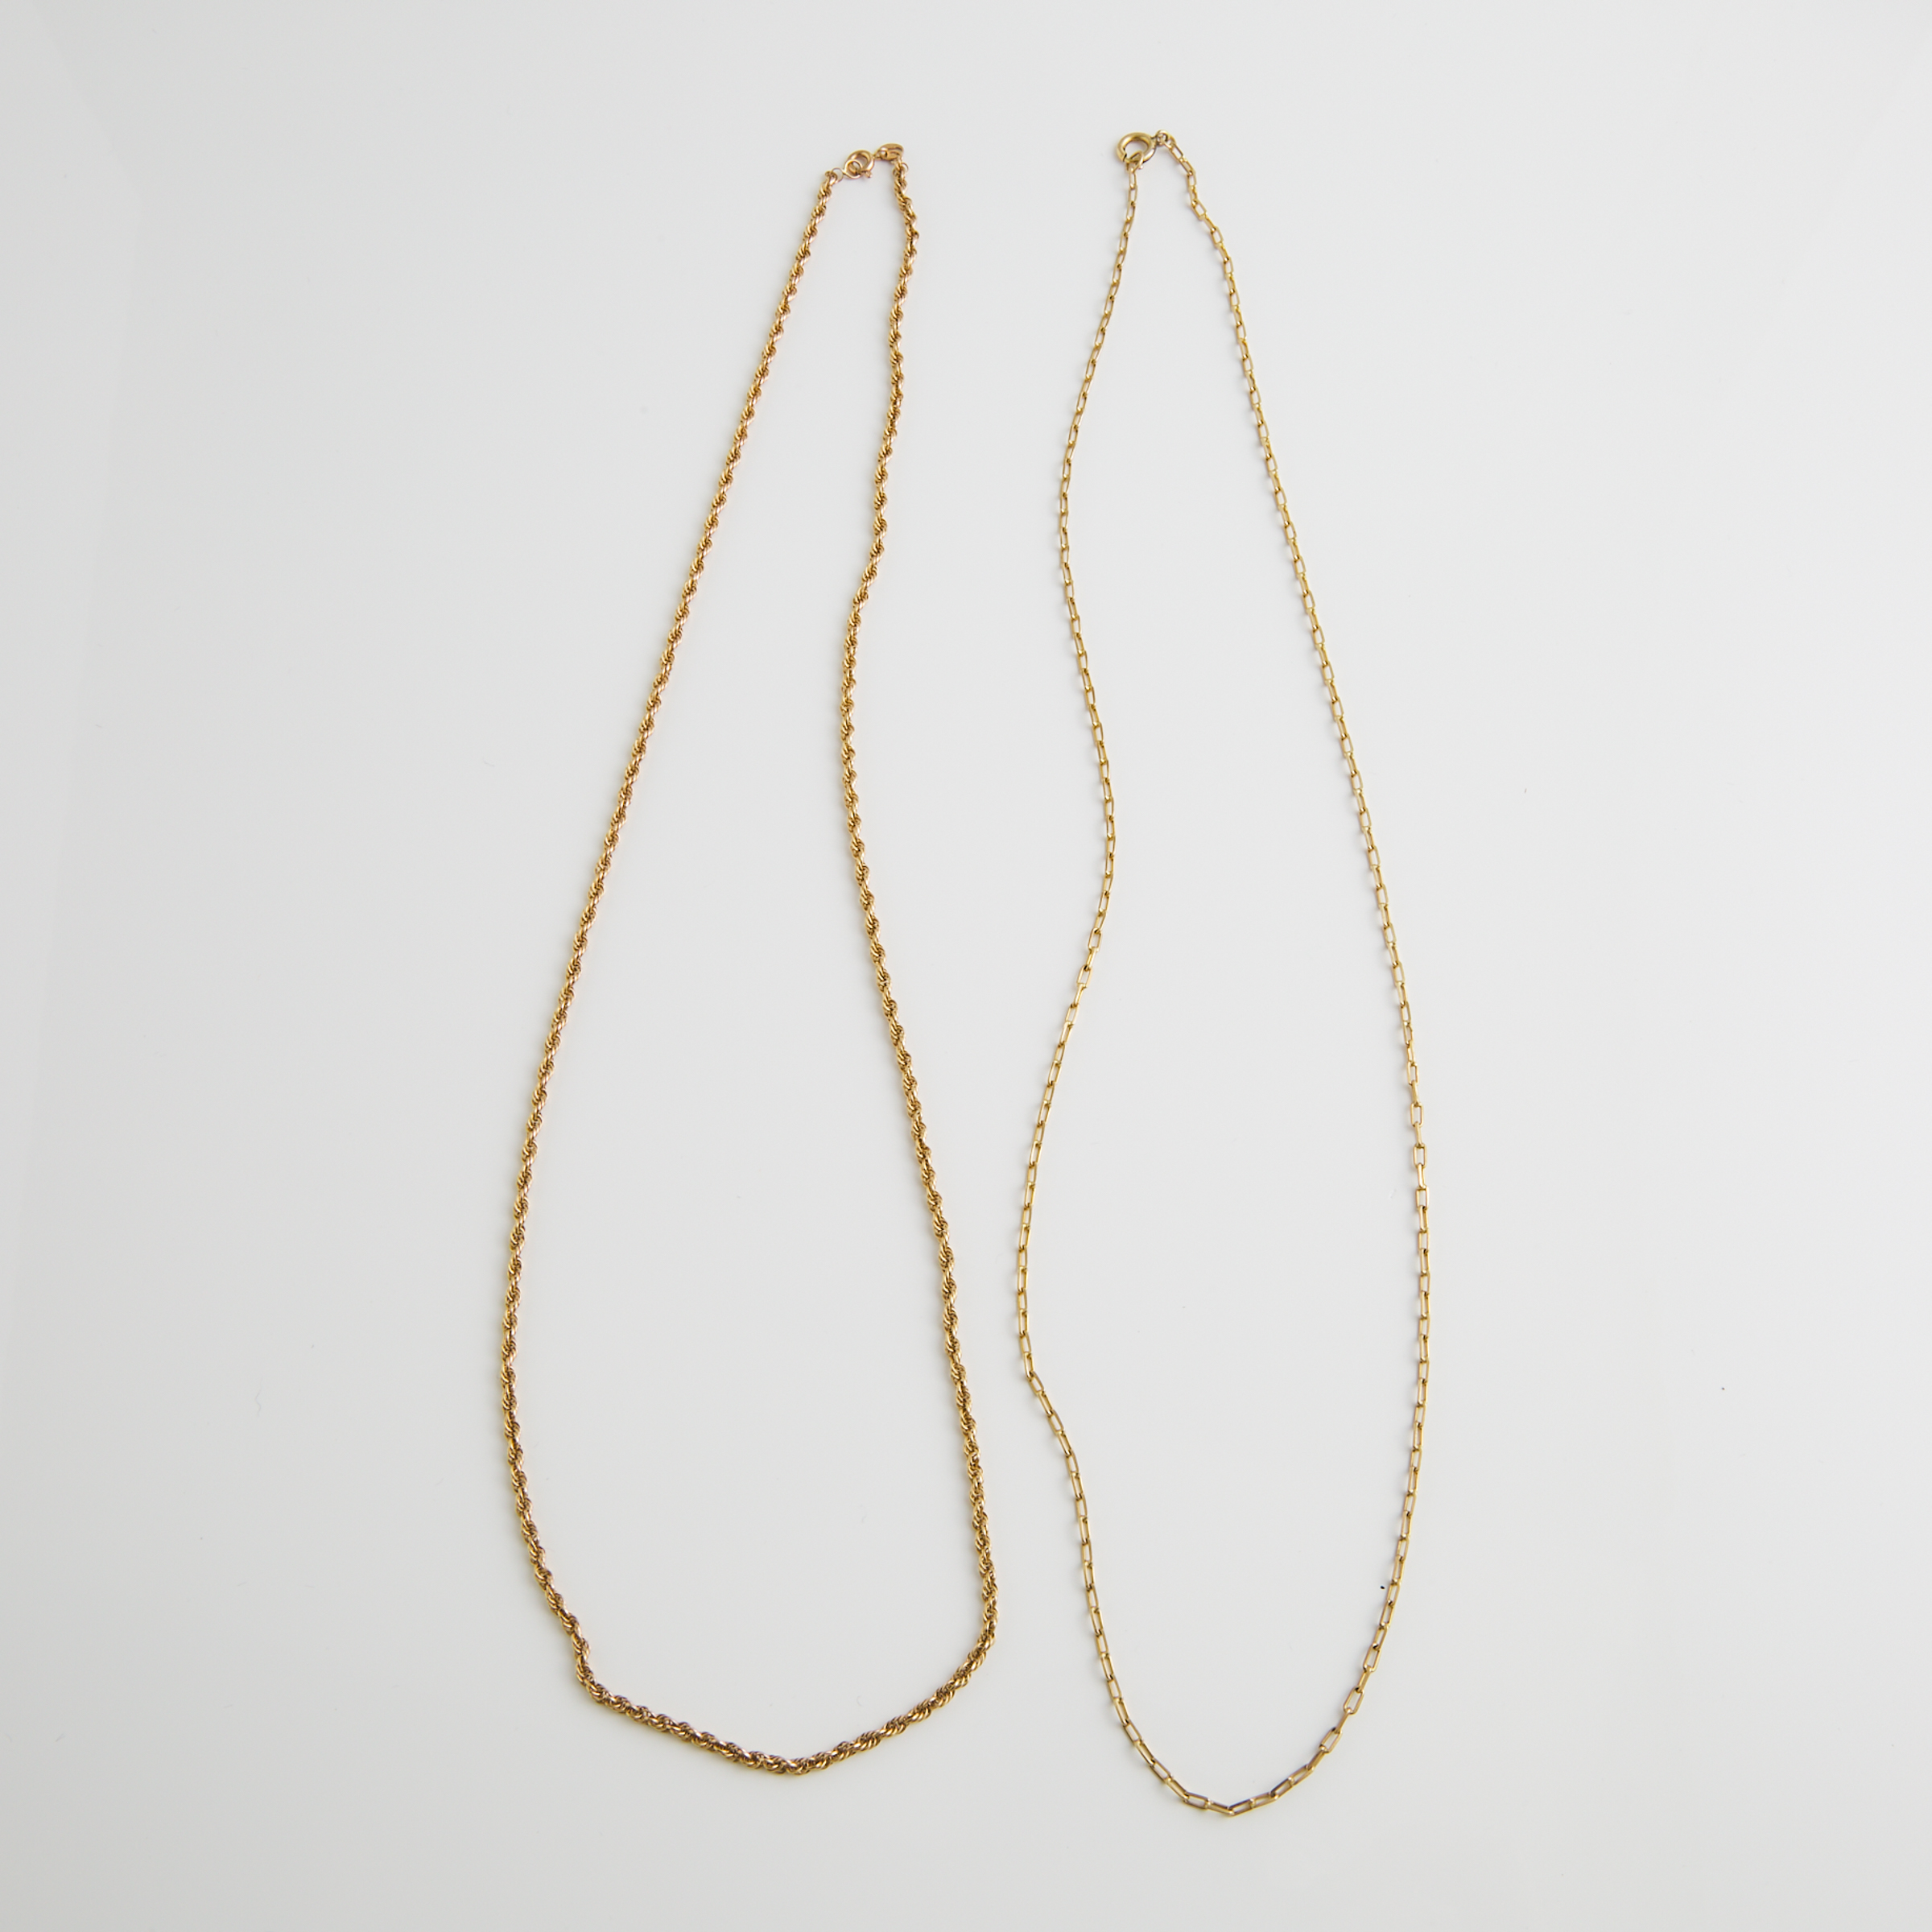 1 x 10k And 1 x 14k Yellow Gold Chains